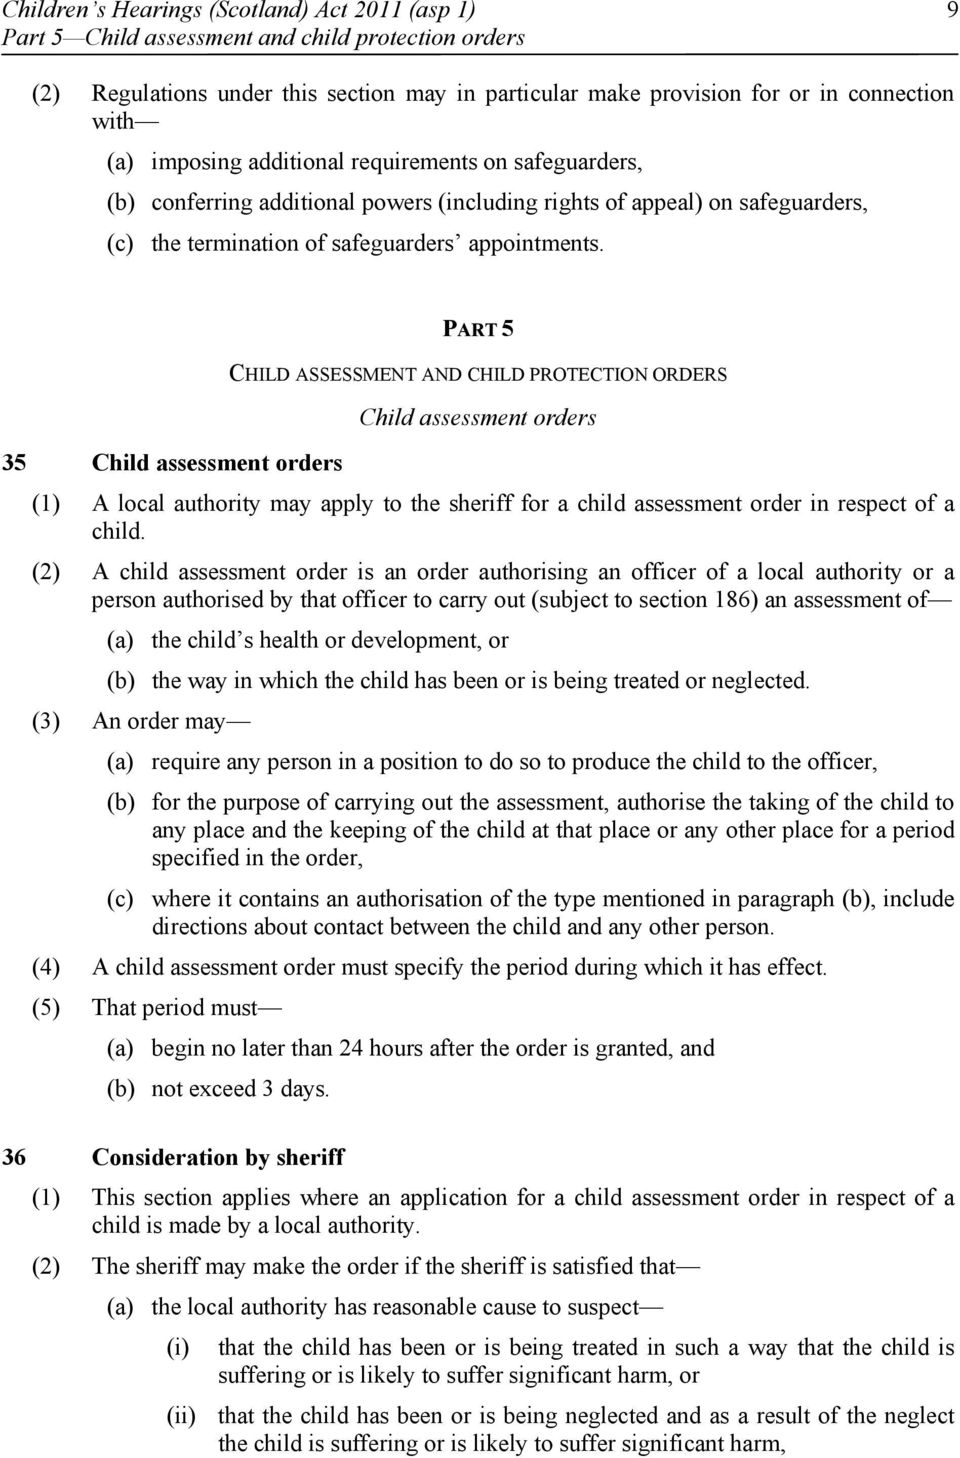 PART 5 CHILD ASSESSMENT AND CHILD PROTECTION ORDERS Child assessment orders 35 Child assessment orders (1) A local authority may apply to the sheriff for a child assessment order in respect of a